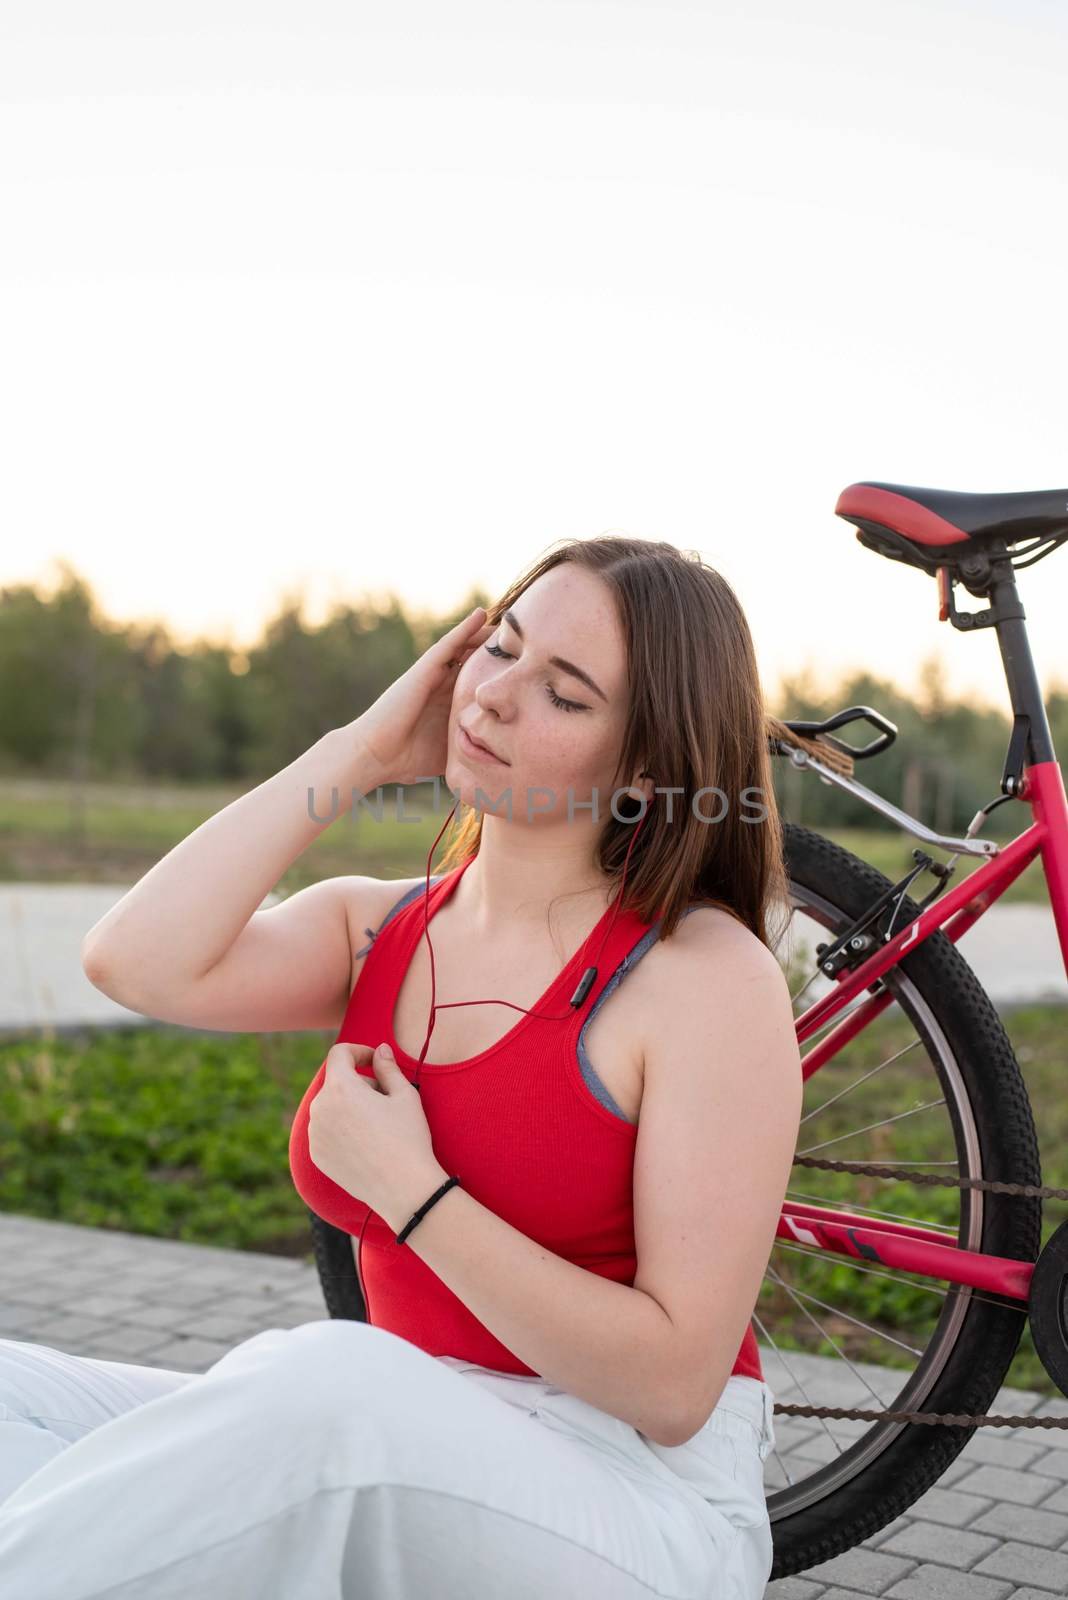 Teenage girl sitting next to her bike listening to the music in the park at sunset by Desperada